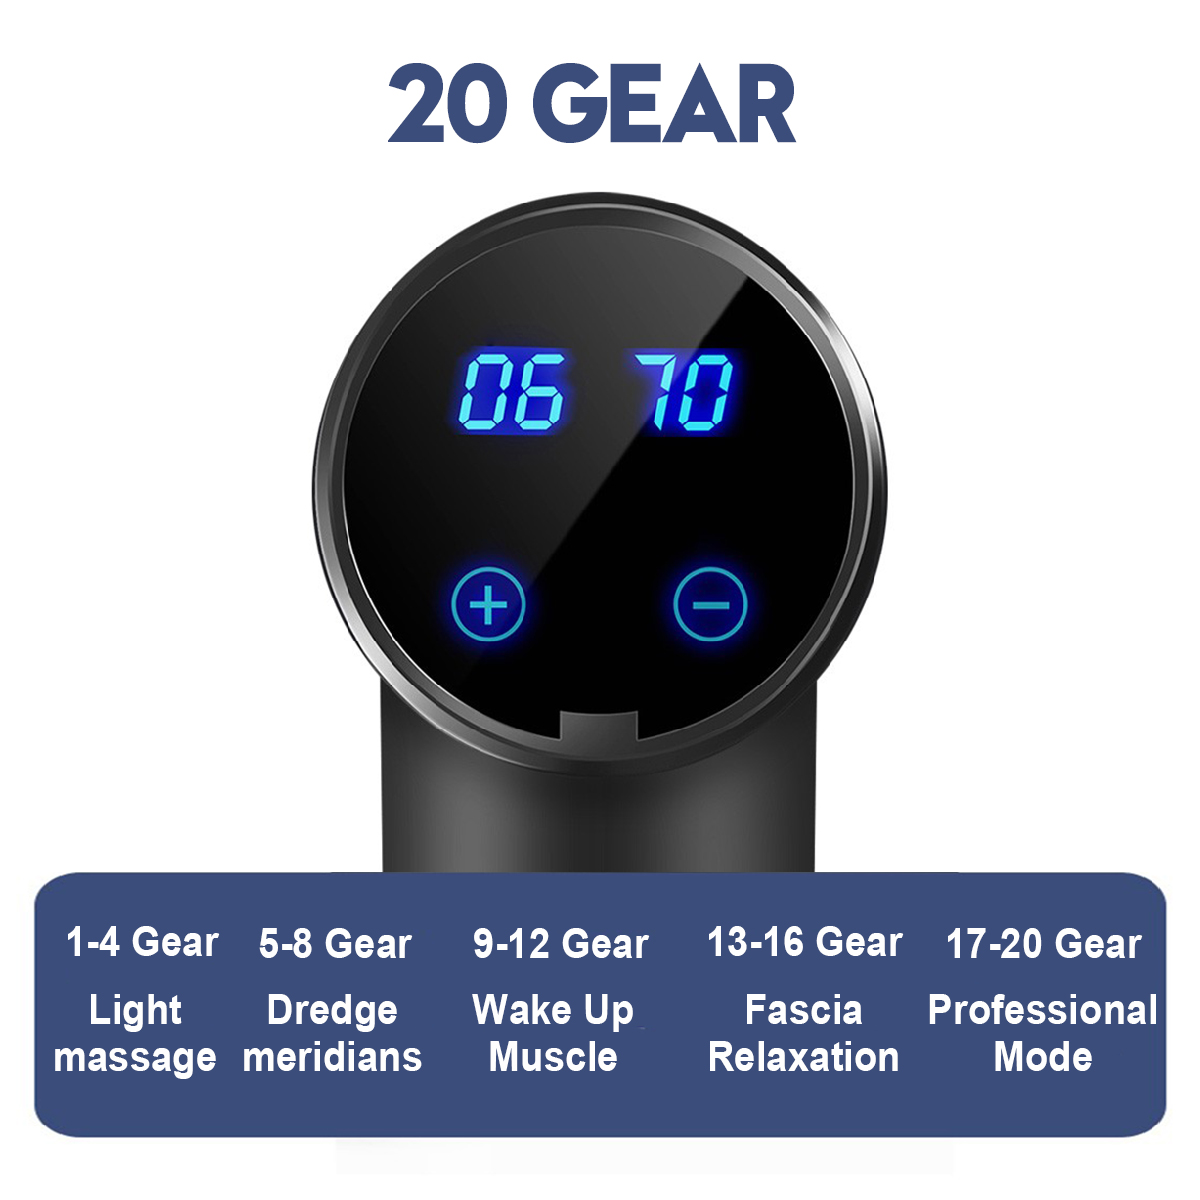 12V-20-Gear-Display-Electric-Percussion-Massager-6-Speeds-2000mAh-Fascia-Muscle-Vibrating-Relaxing-D-1649985-5